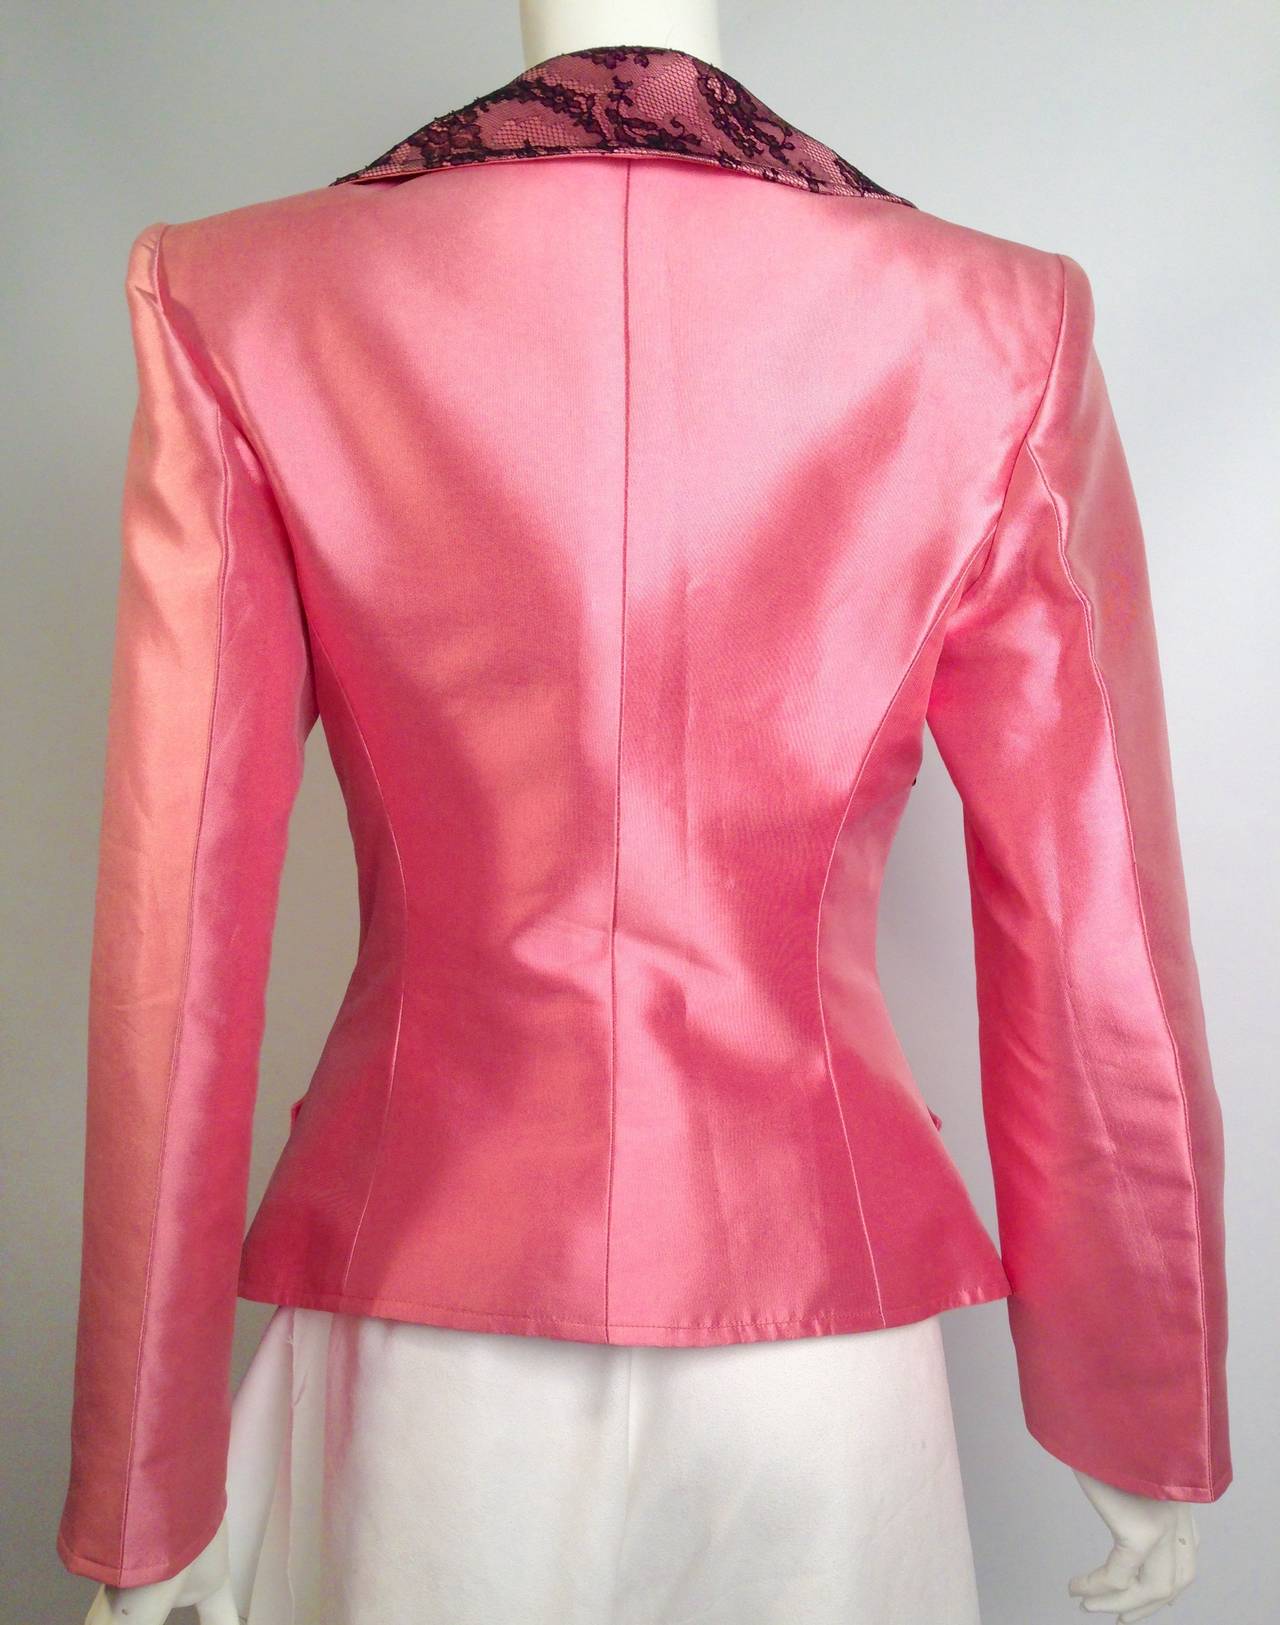 Indulge in the luxurious world of renowned haute couturier Christian Lacroix!  This stunning silk evening jacket is all the more tempting in a delightful shade of pink cotton candy.  Feminine and fitted jacket features asymmetric peaked lapel and